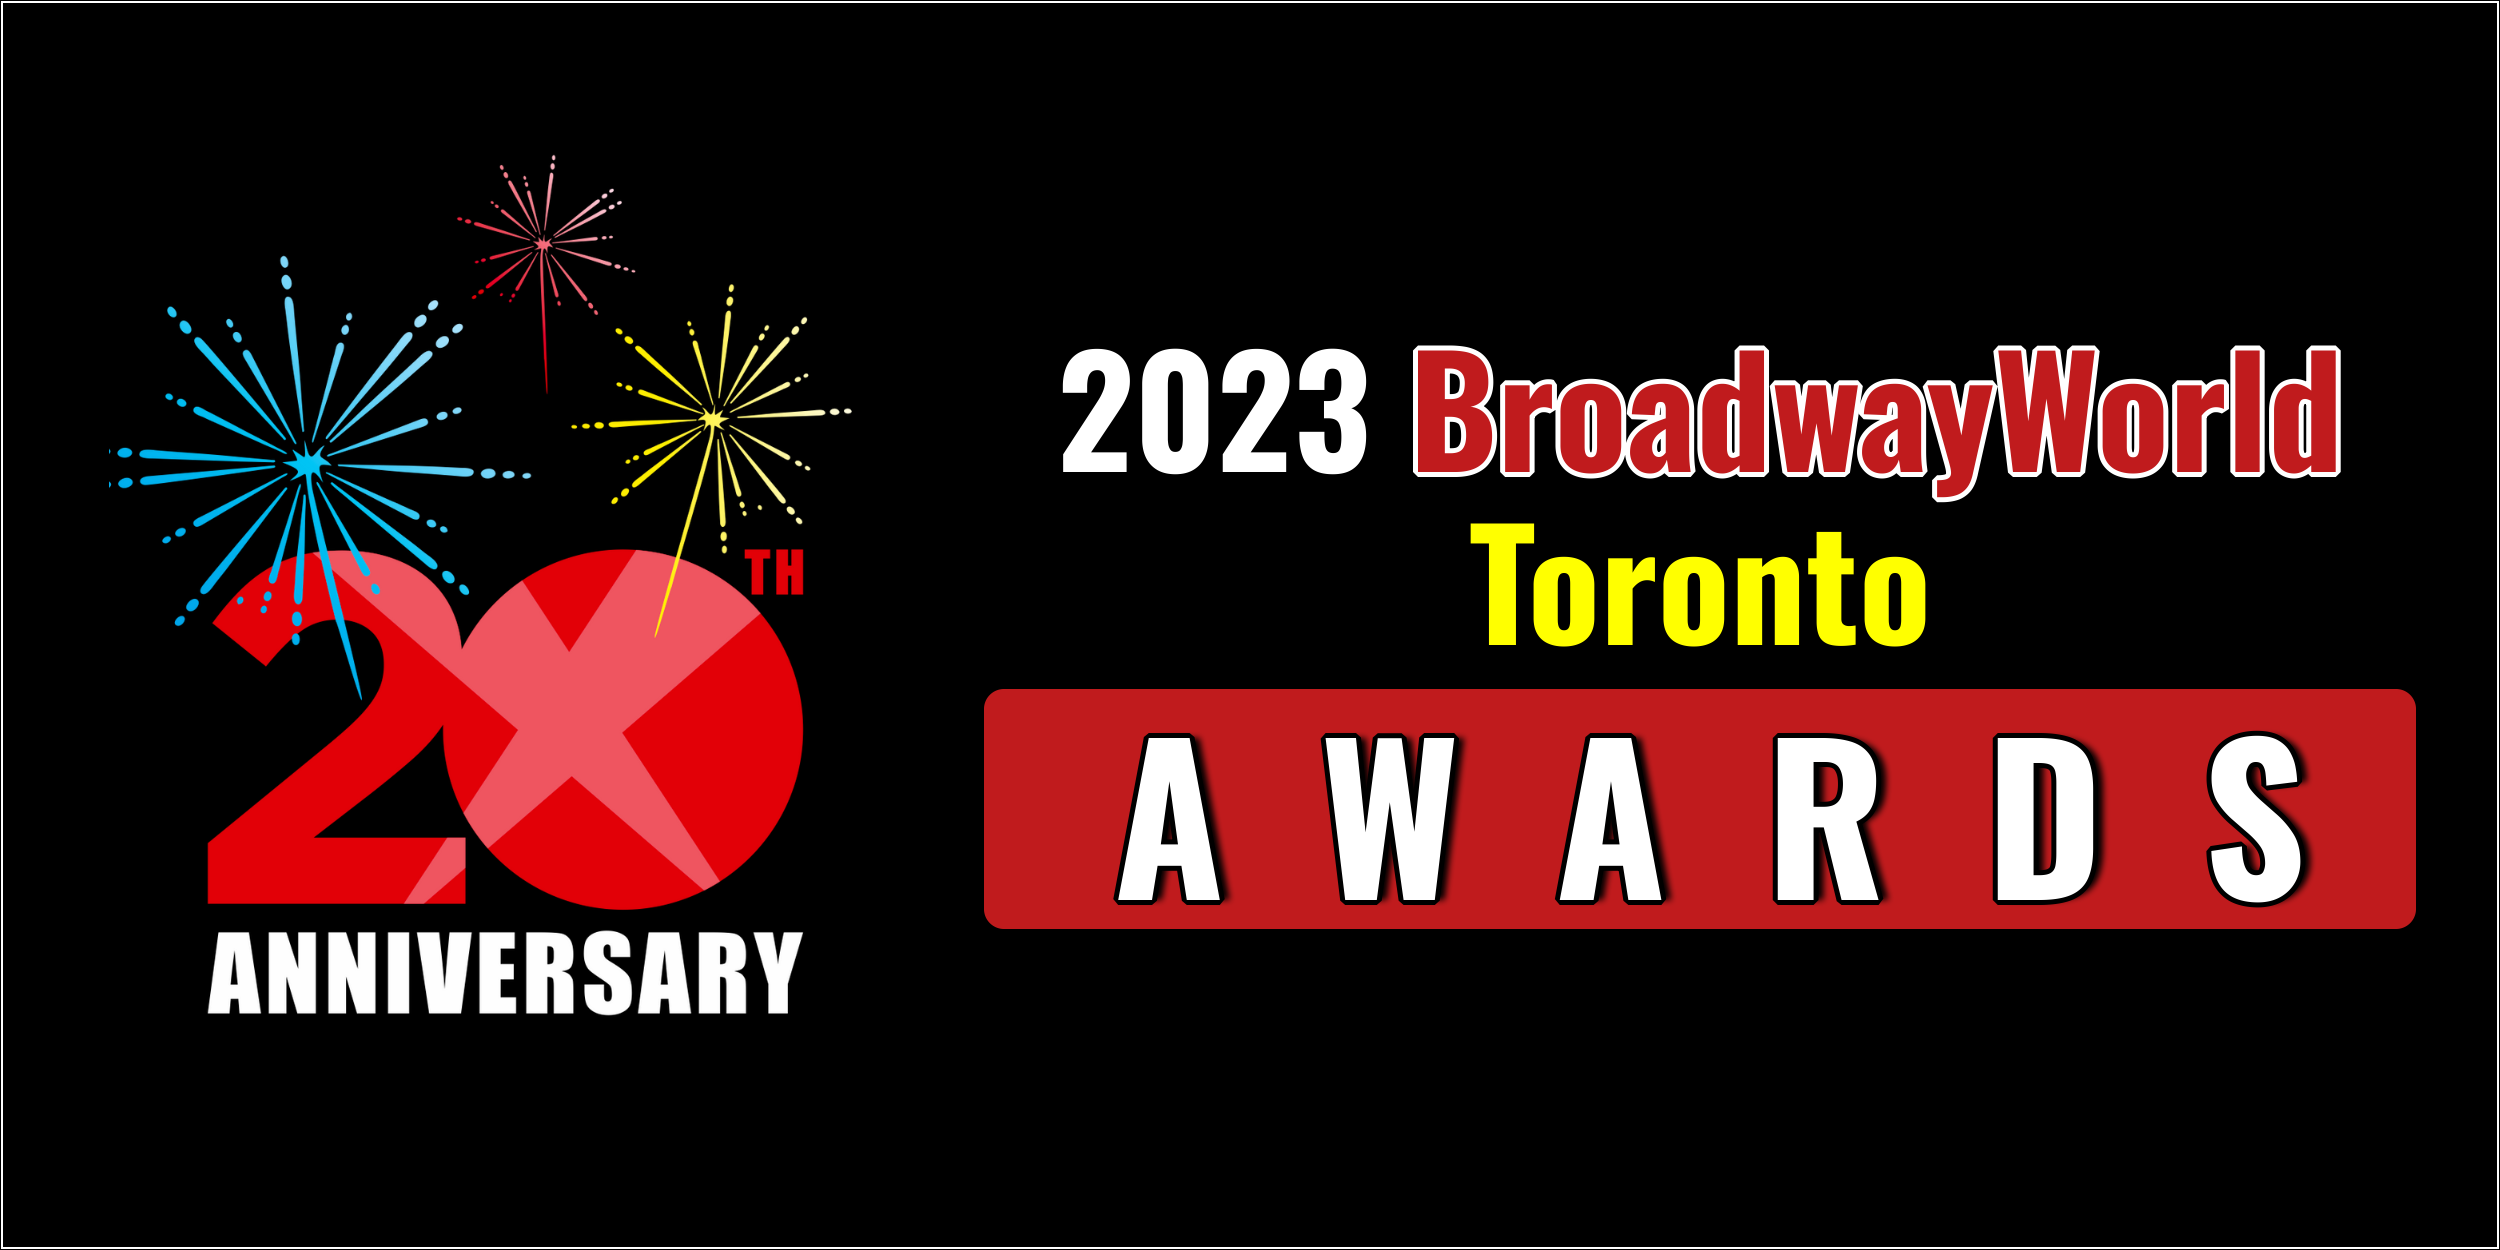 Latest Standings Announced For The 2023 BroadwayWorld Toronto Awards;  Leads Favorite Loca Photo